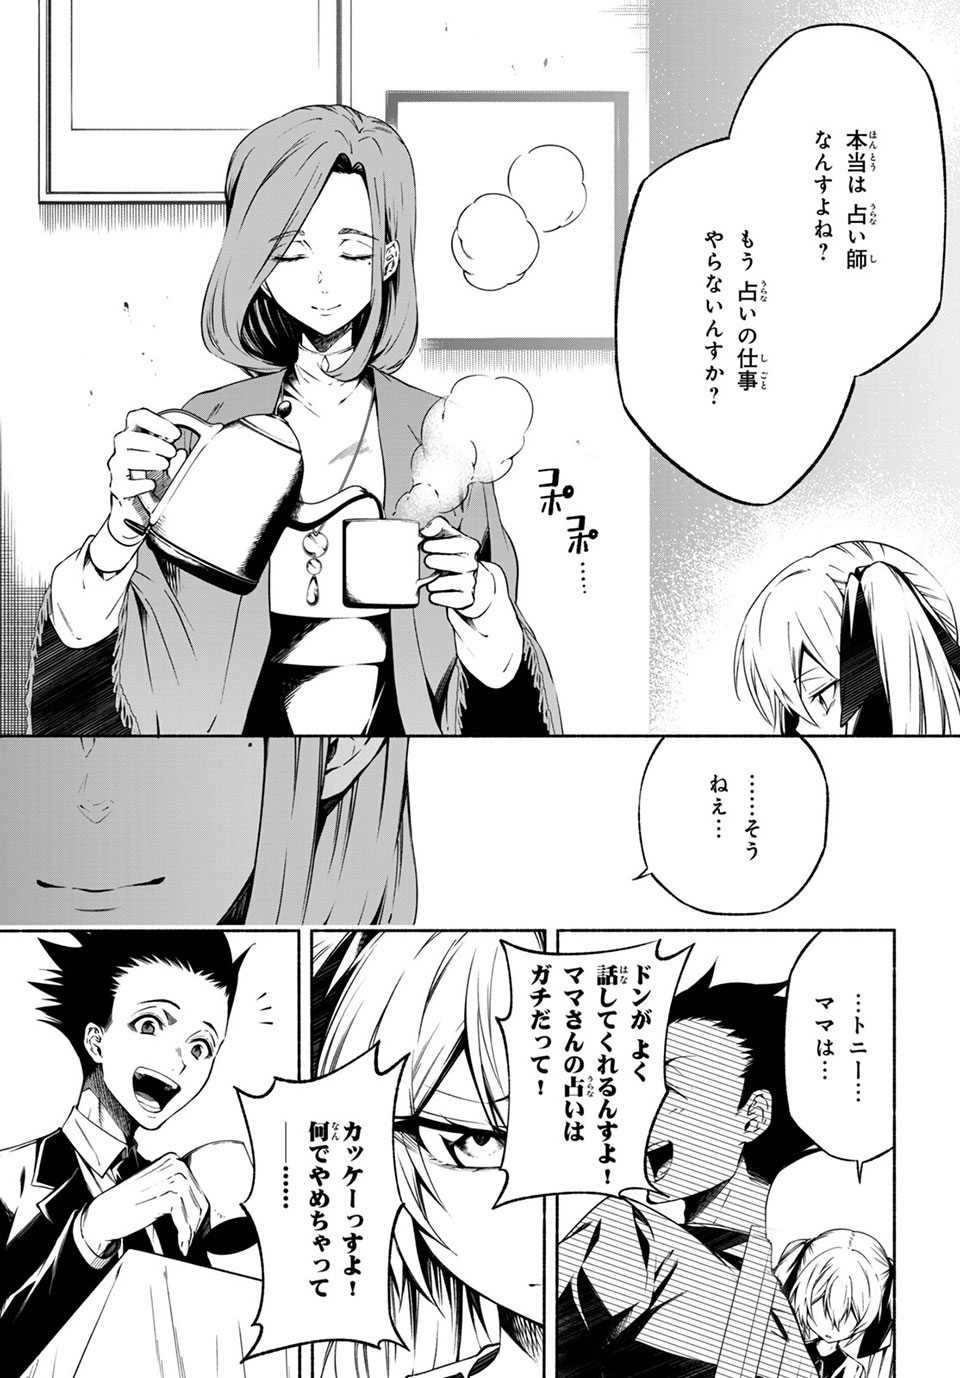 Shaman King: and a garden 第11.2話 - Page 6